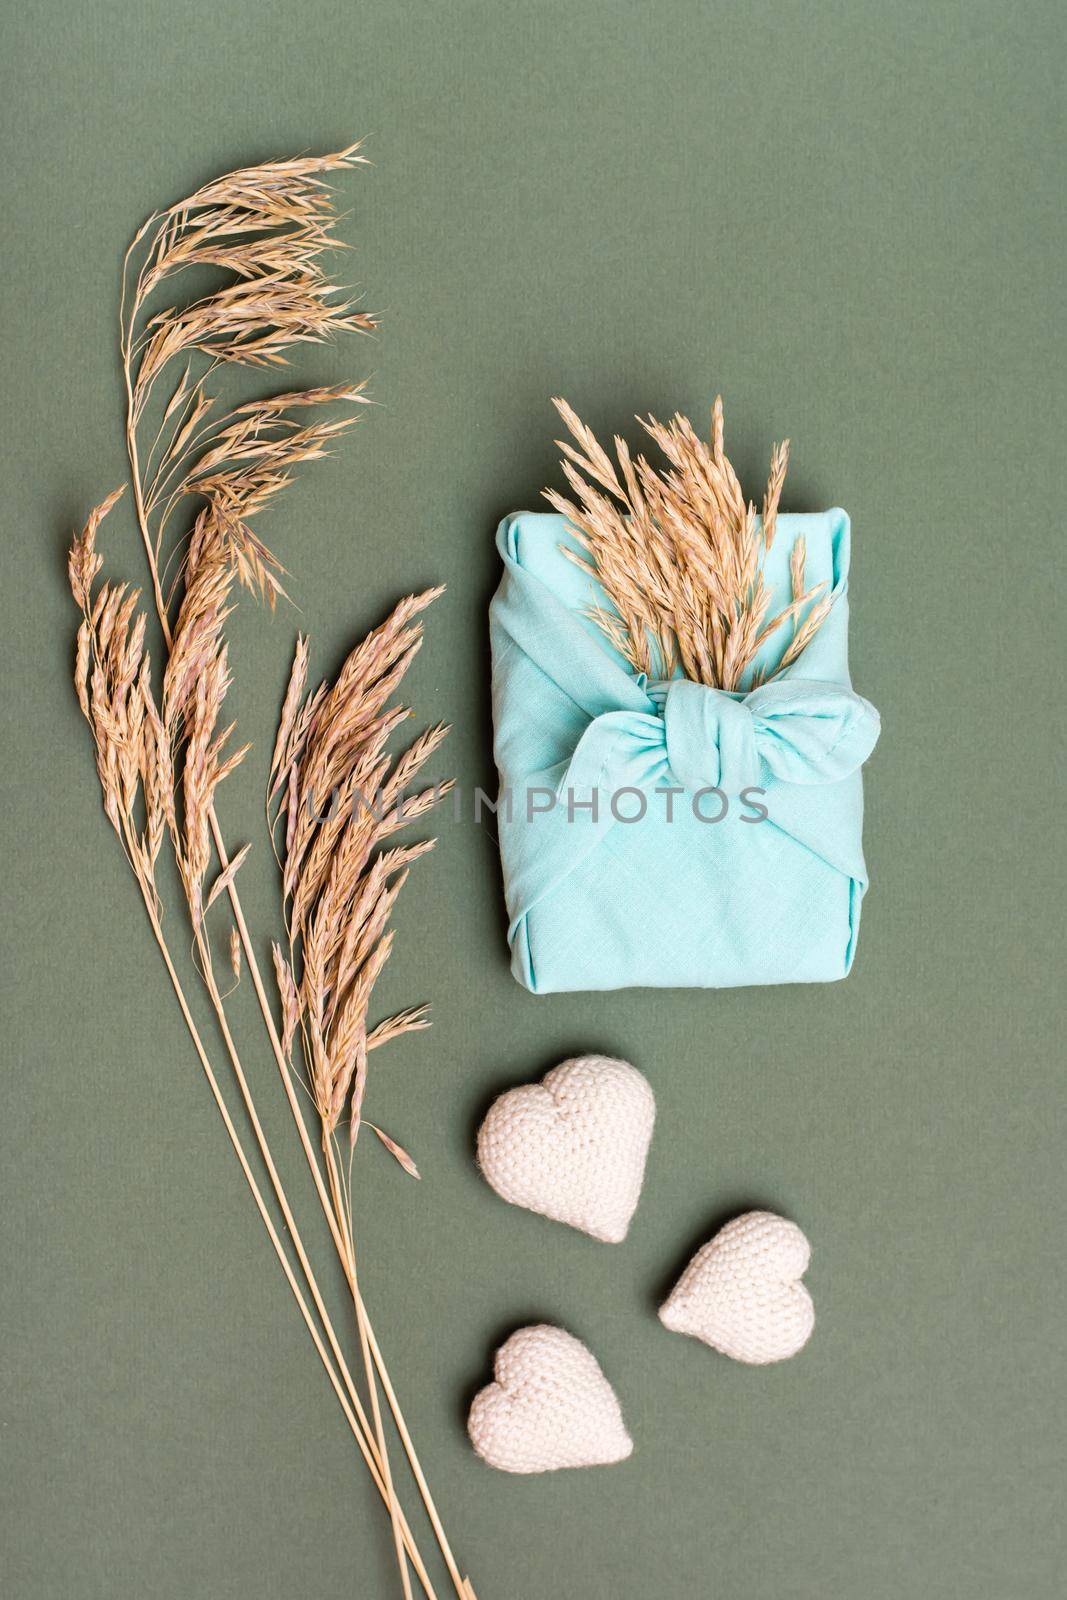 Eco friendly valentine's day gift furoshiki, knitted hearts and ears of dry grass on green background. Vertical view